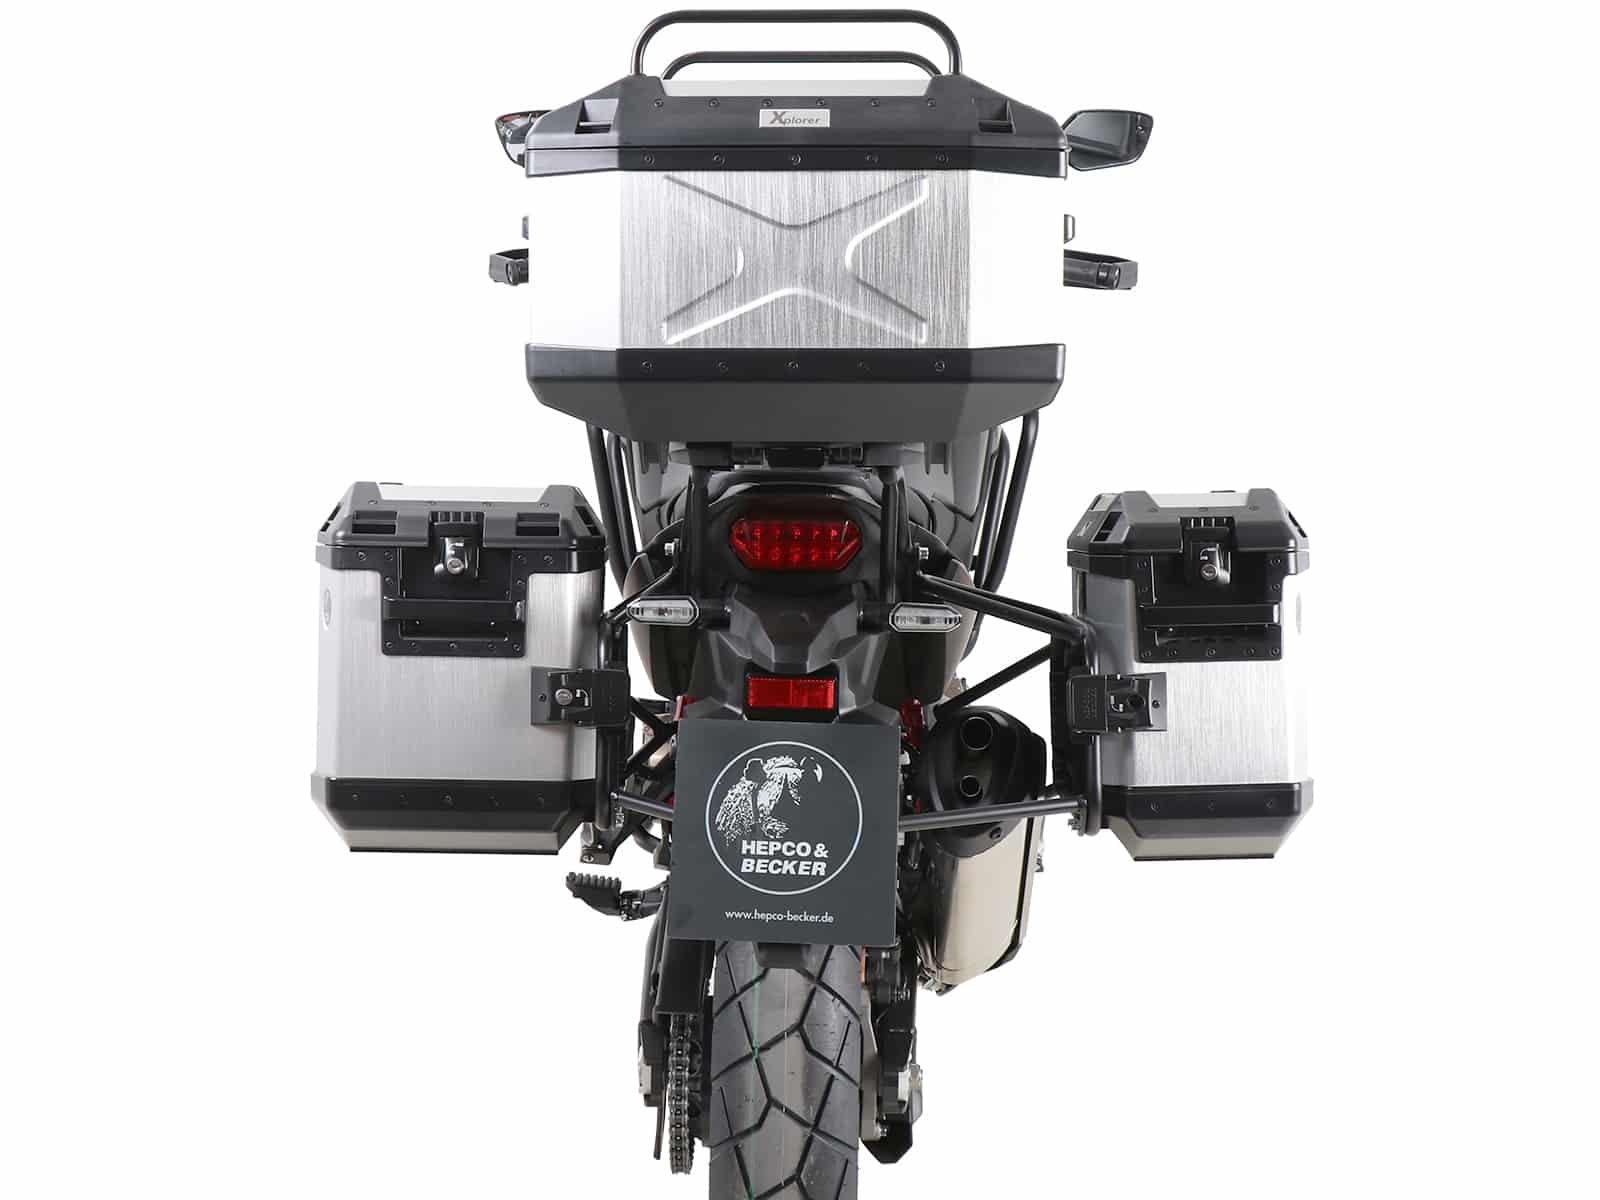 Alurack top case carrier black for Honda CRF 1100 L Africa Twin (2019-2021)